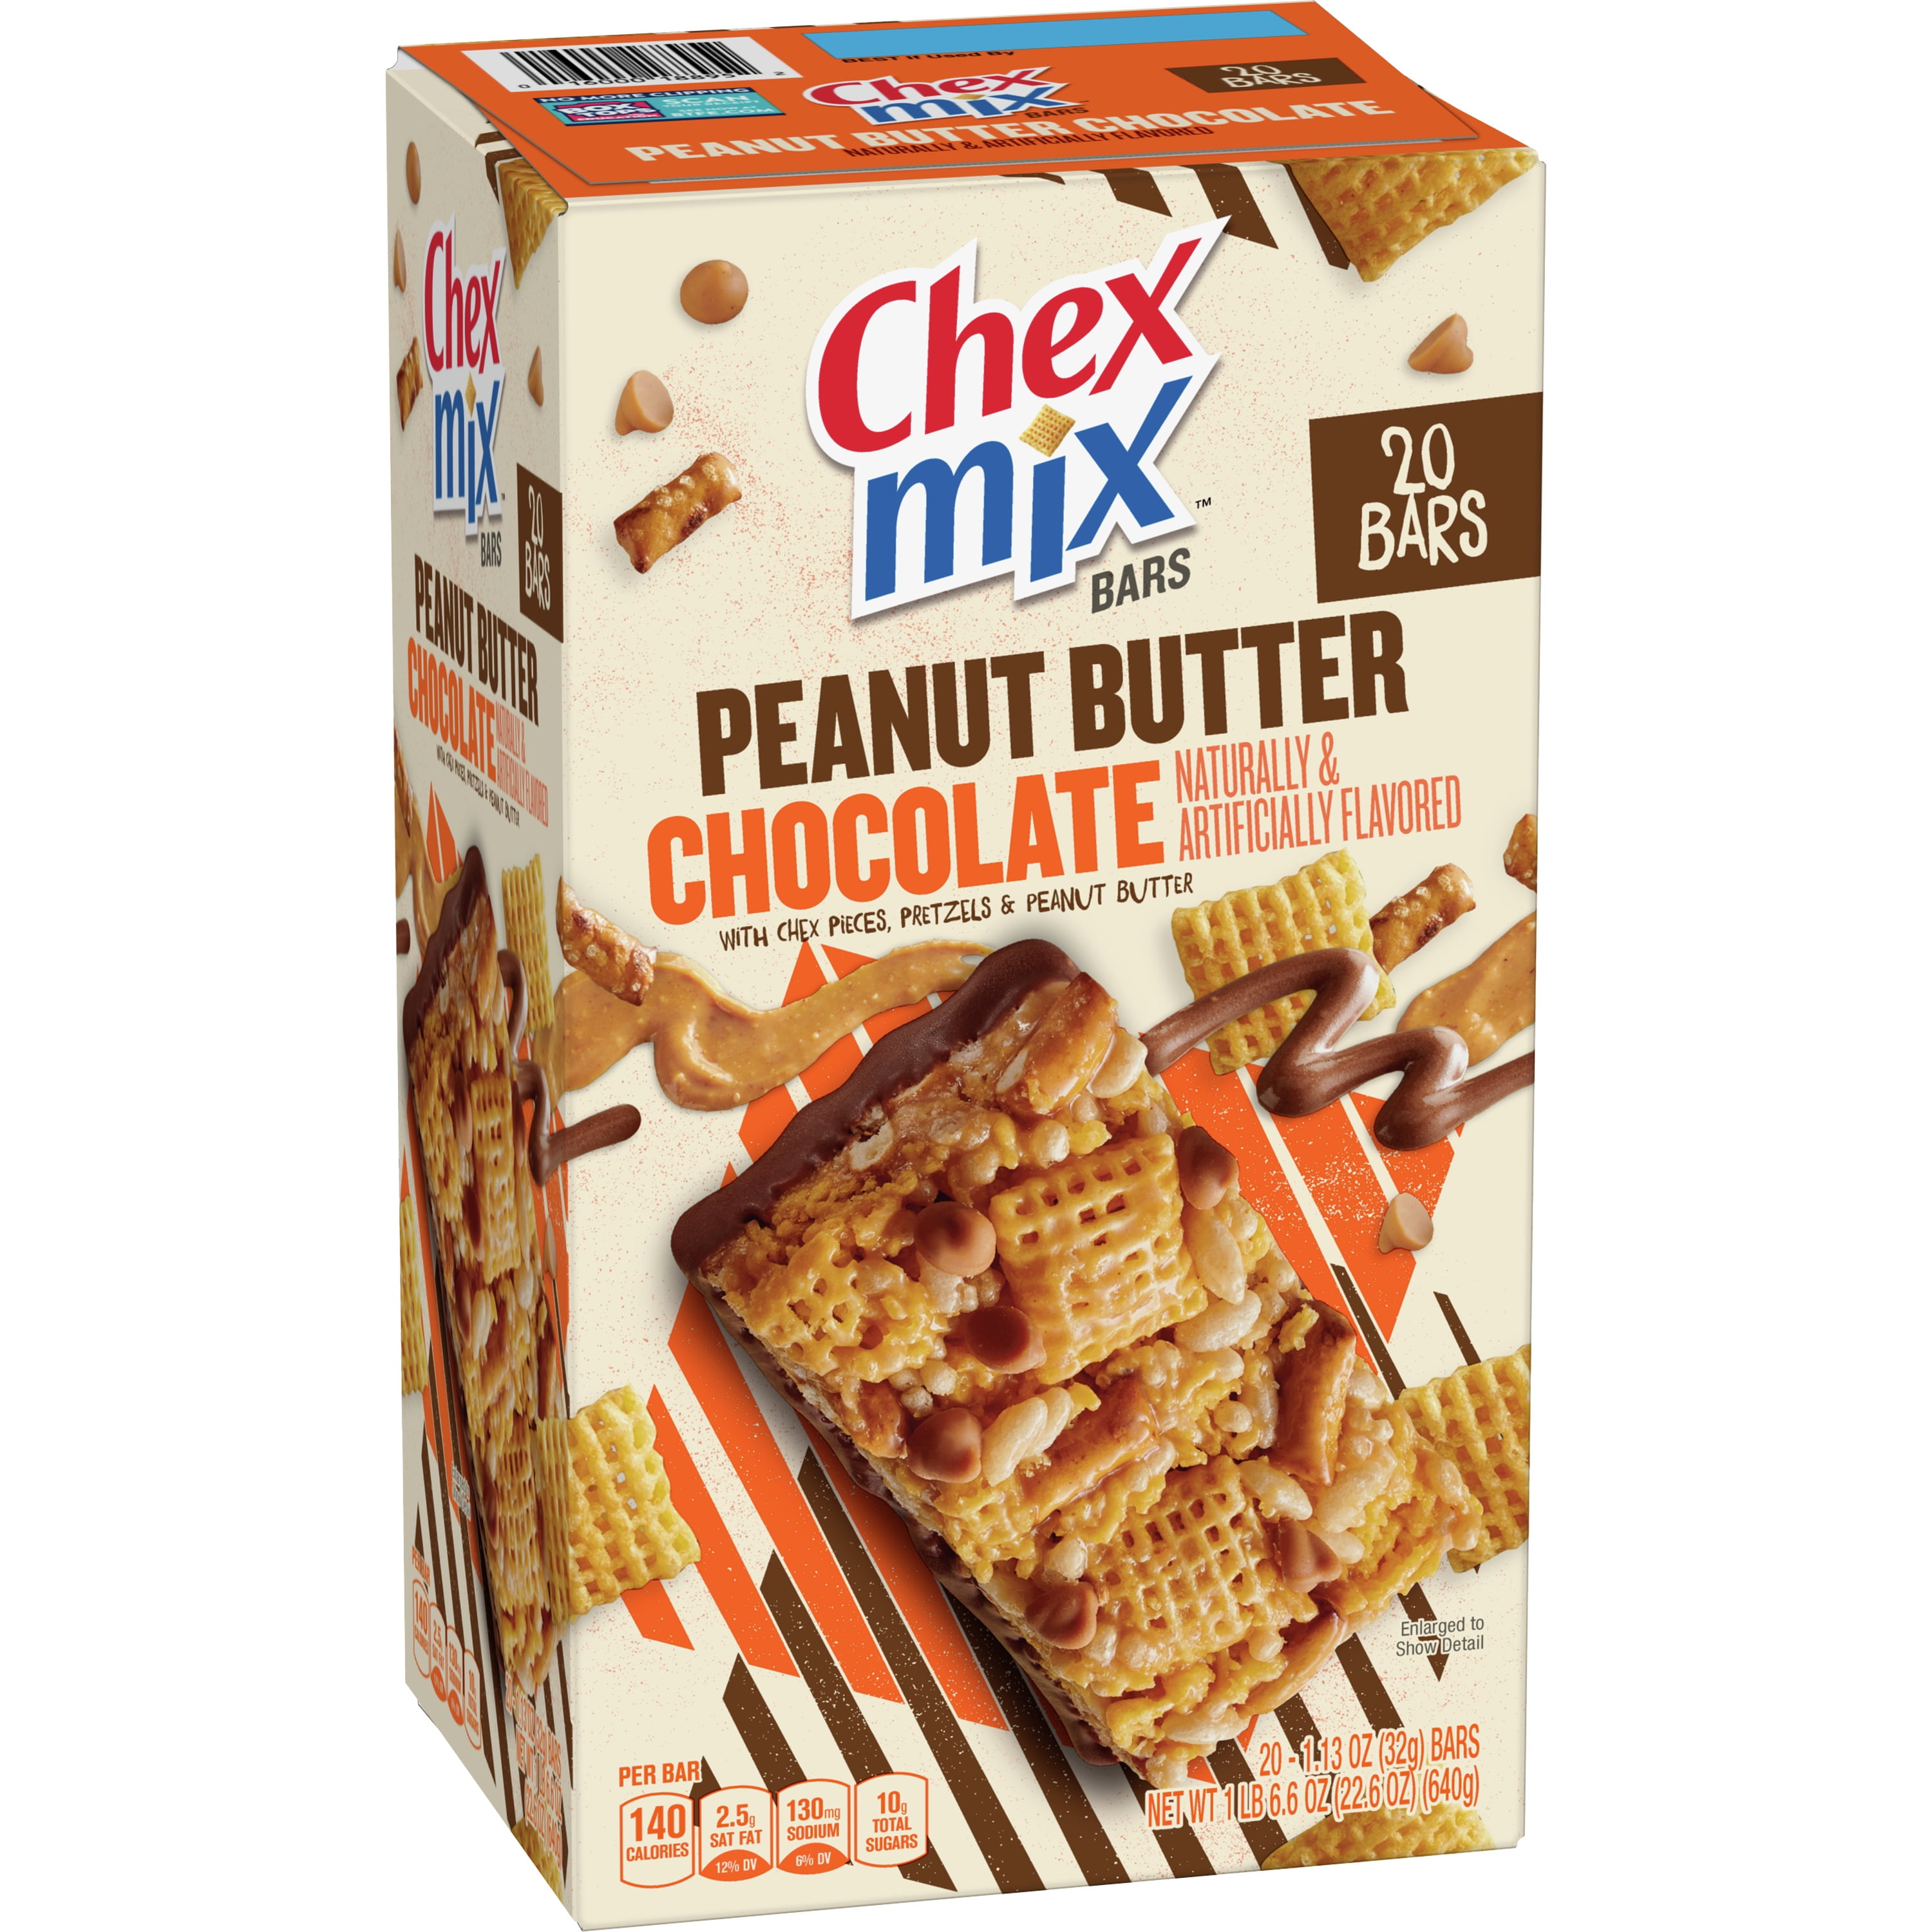 Chex Mix Bar Chocolate Peanut Butter (Pack of 4), 4 packs - Foods Co.